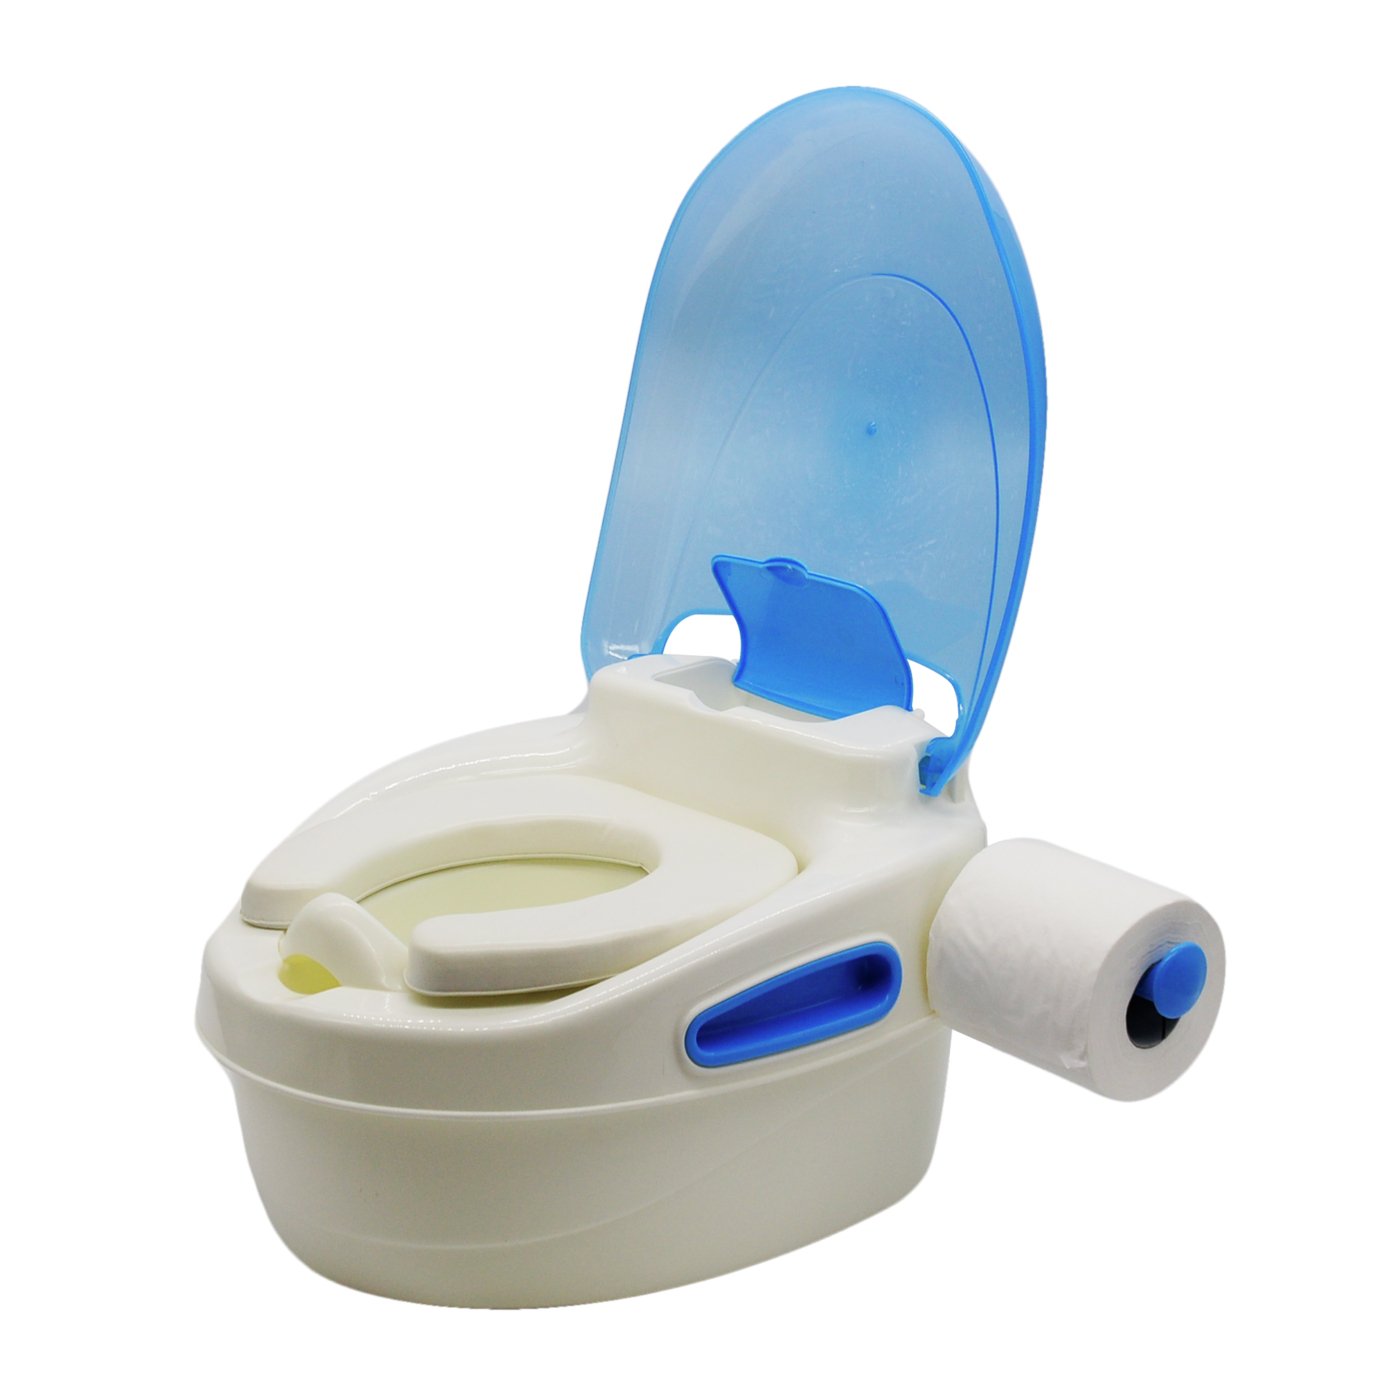 Cuggl 3-in-1 Potty